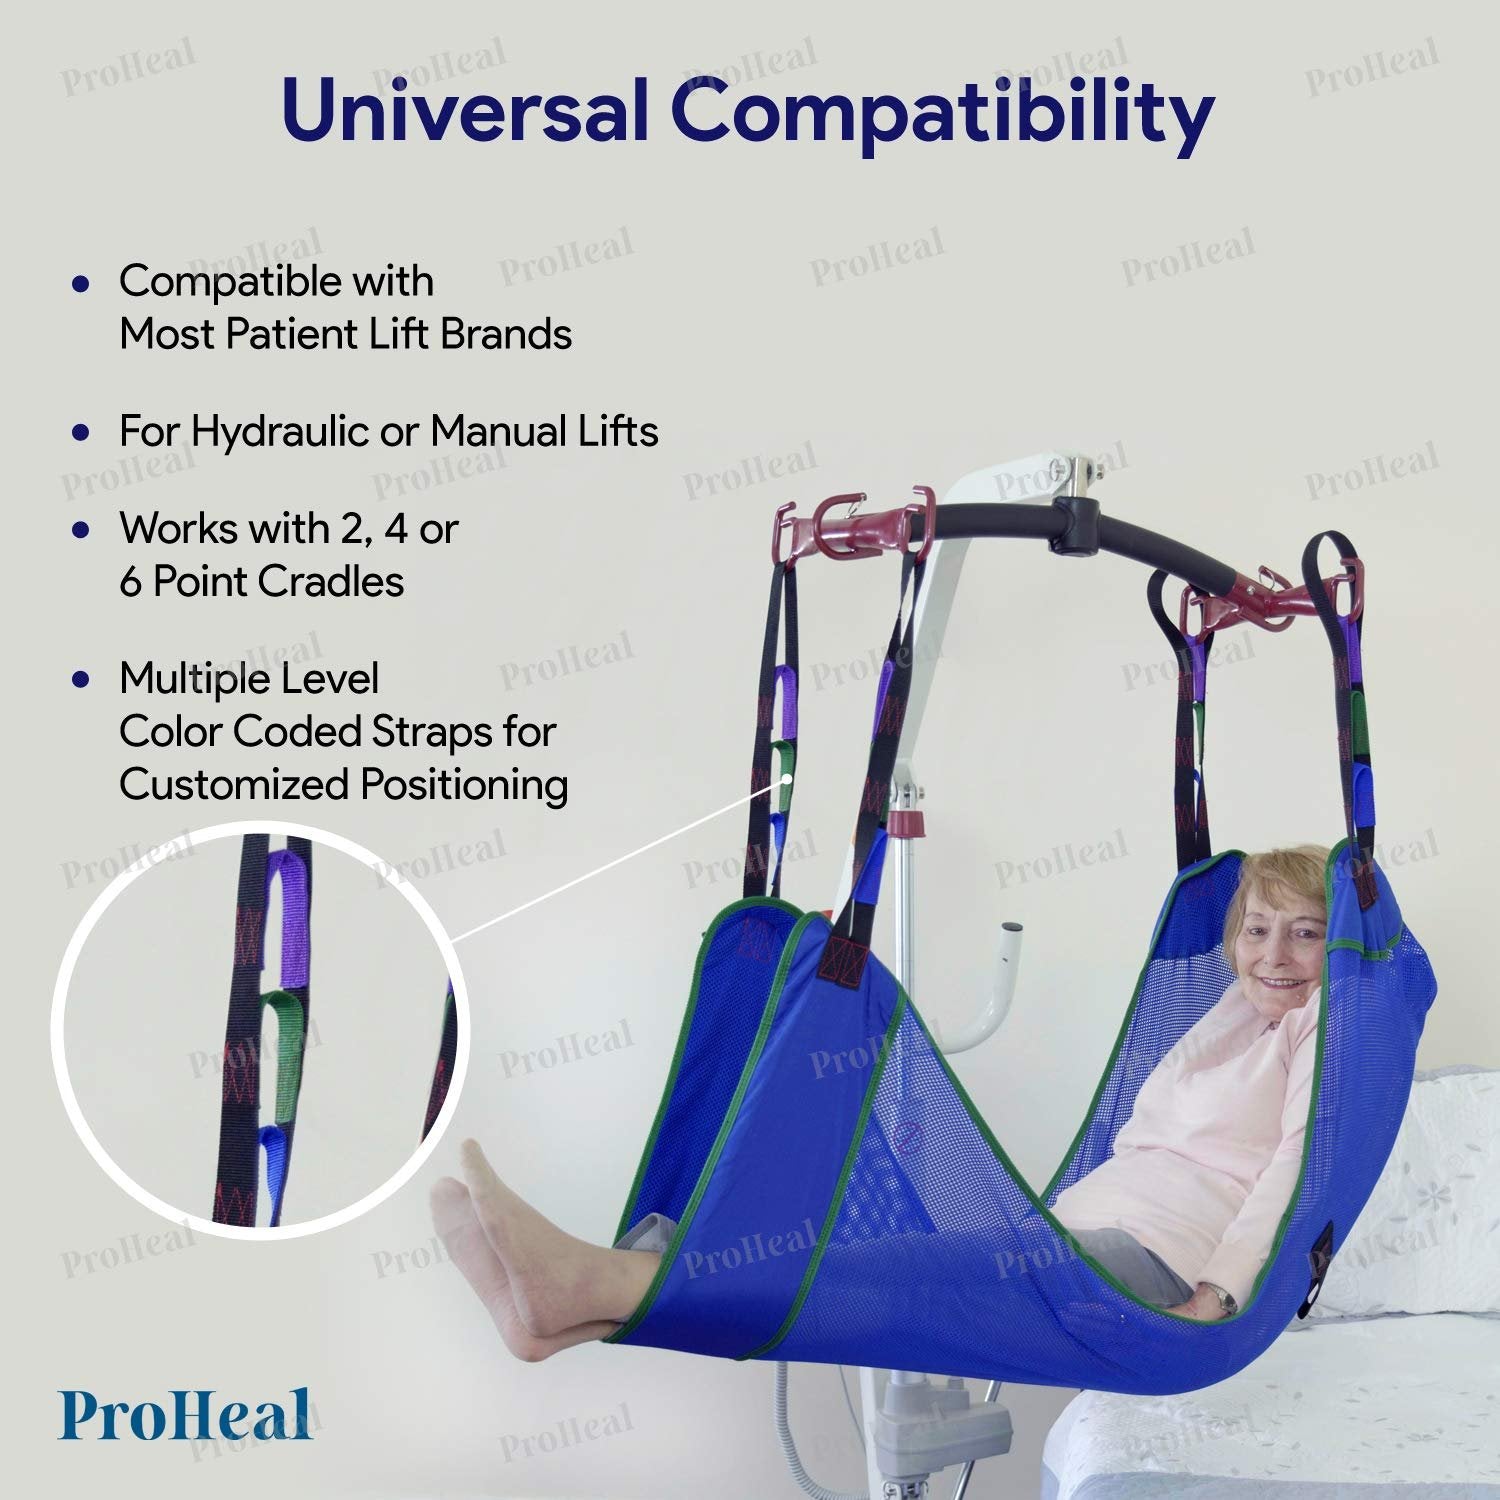 ProHeal Universal Full Body Mesh Lift Sling with Commode Opening, XX Large, 50.5" L x 44" - Polyester Slings for Patient Lifts -Compatible with Hoyer, Invacare, McKesson, Drive, Lumex, Joerns